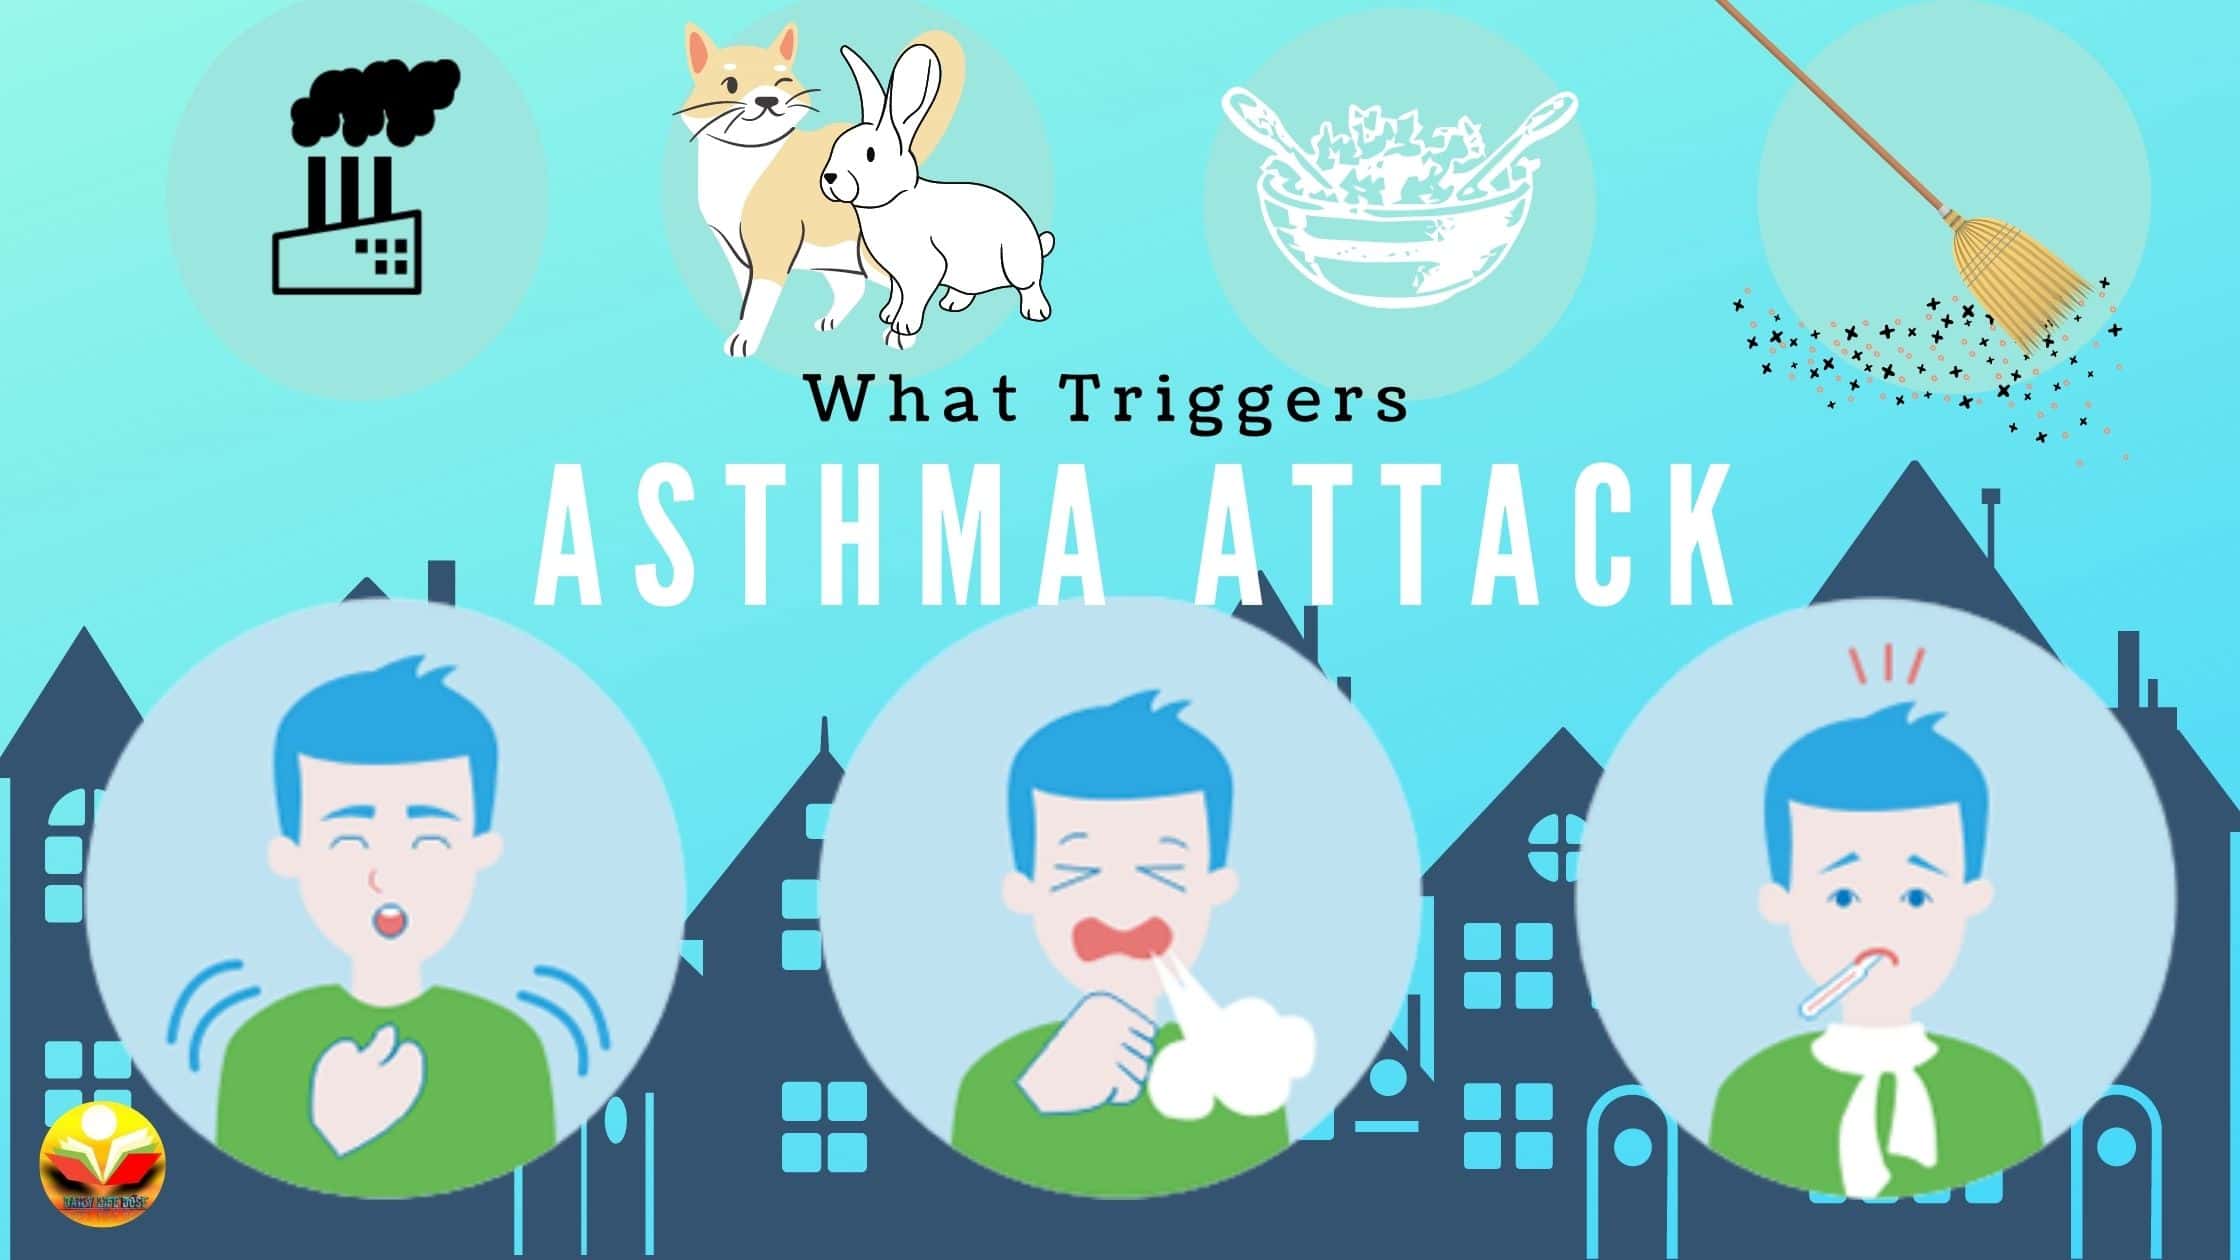 What Triggers Asthma Attack and Prevention?